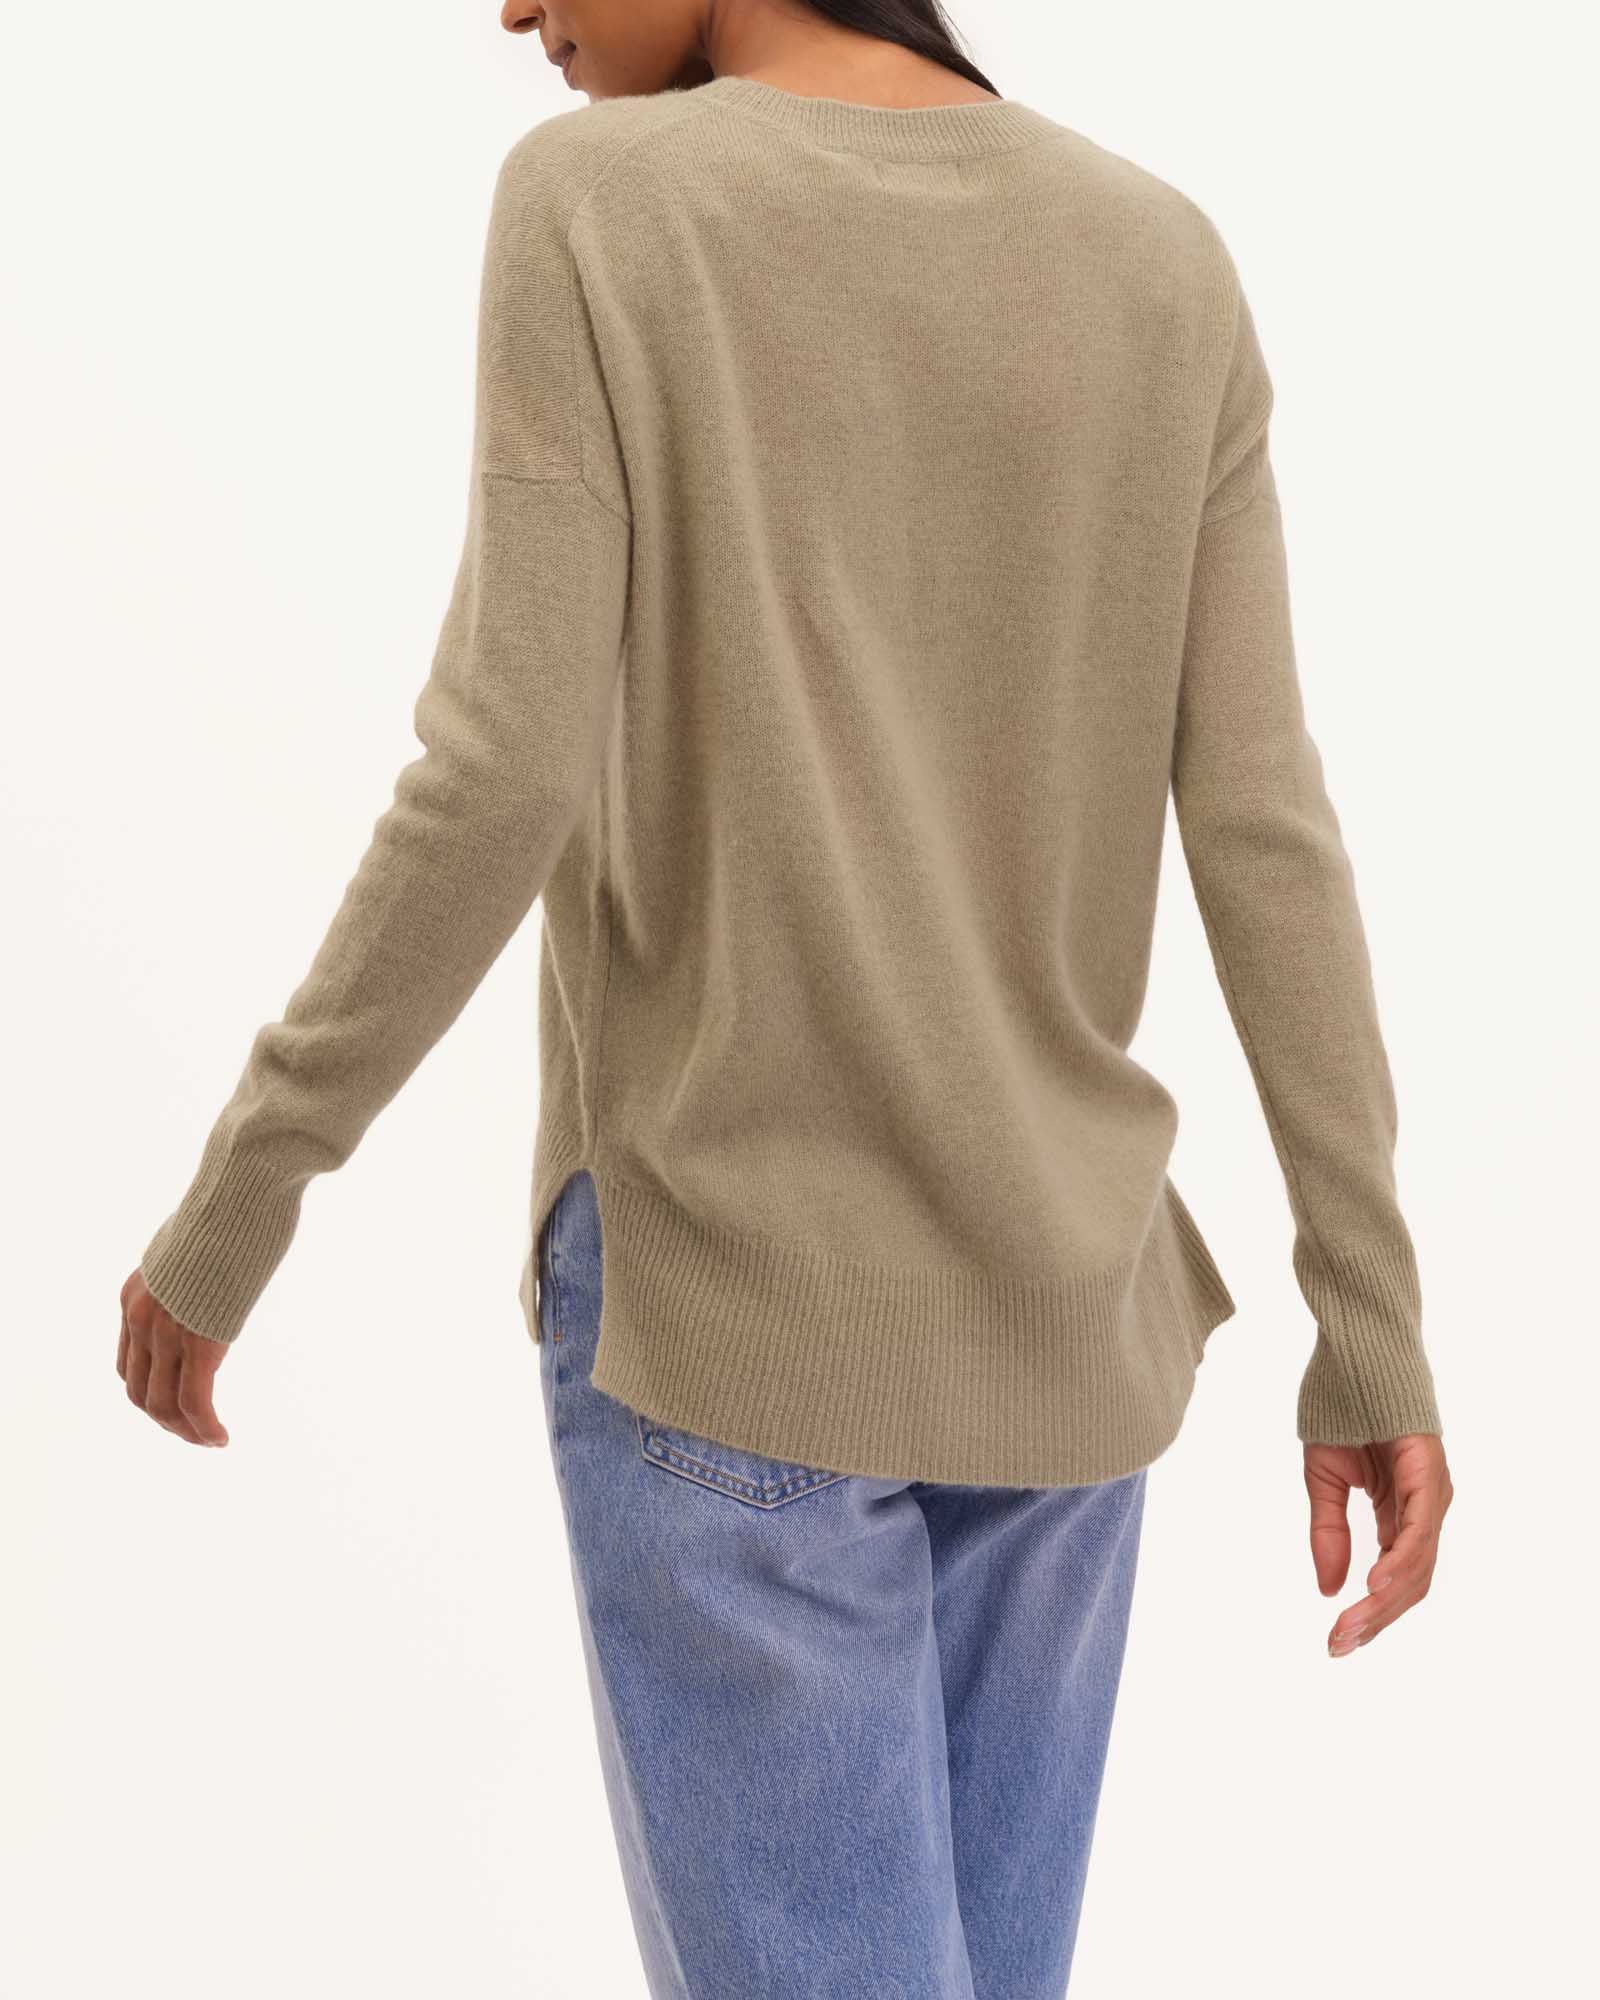 Our classic crew neck cashmere sweater *available in Black, H